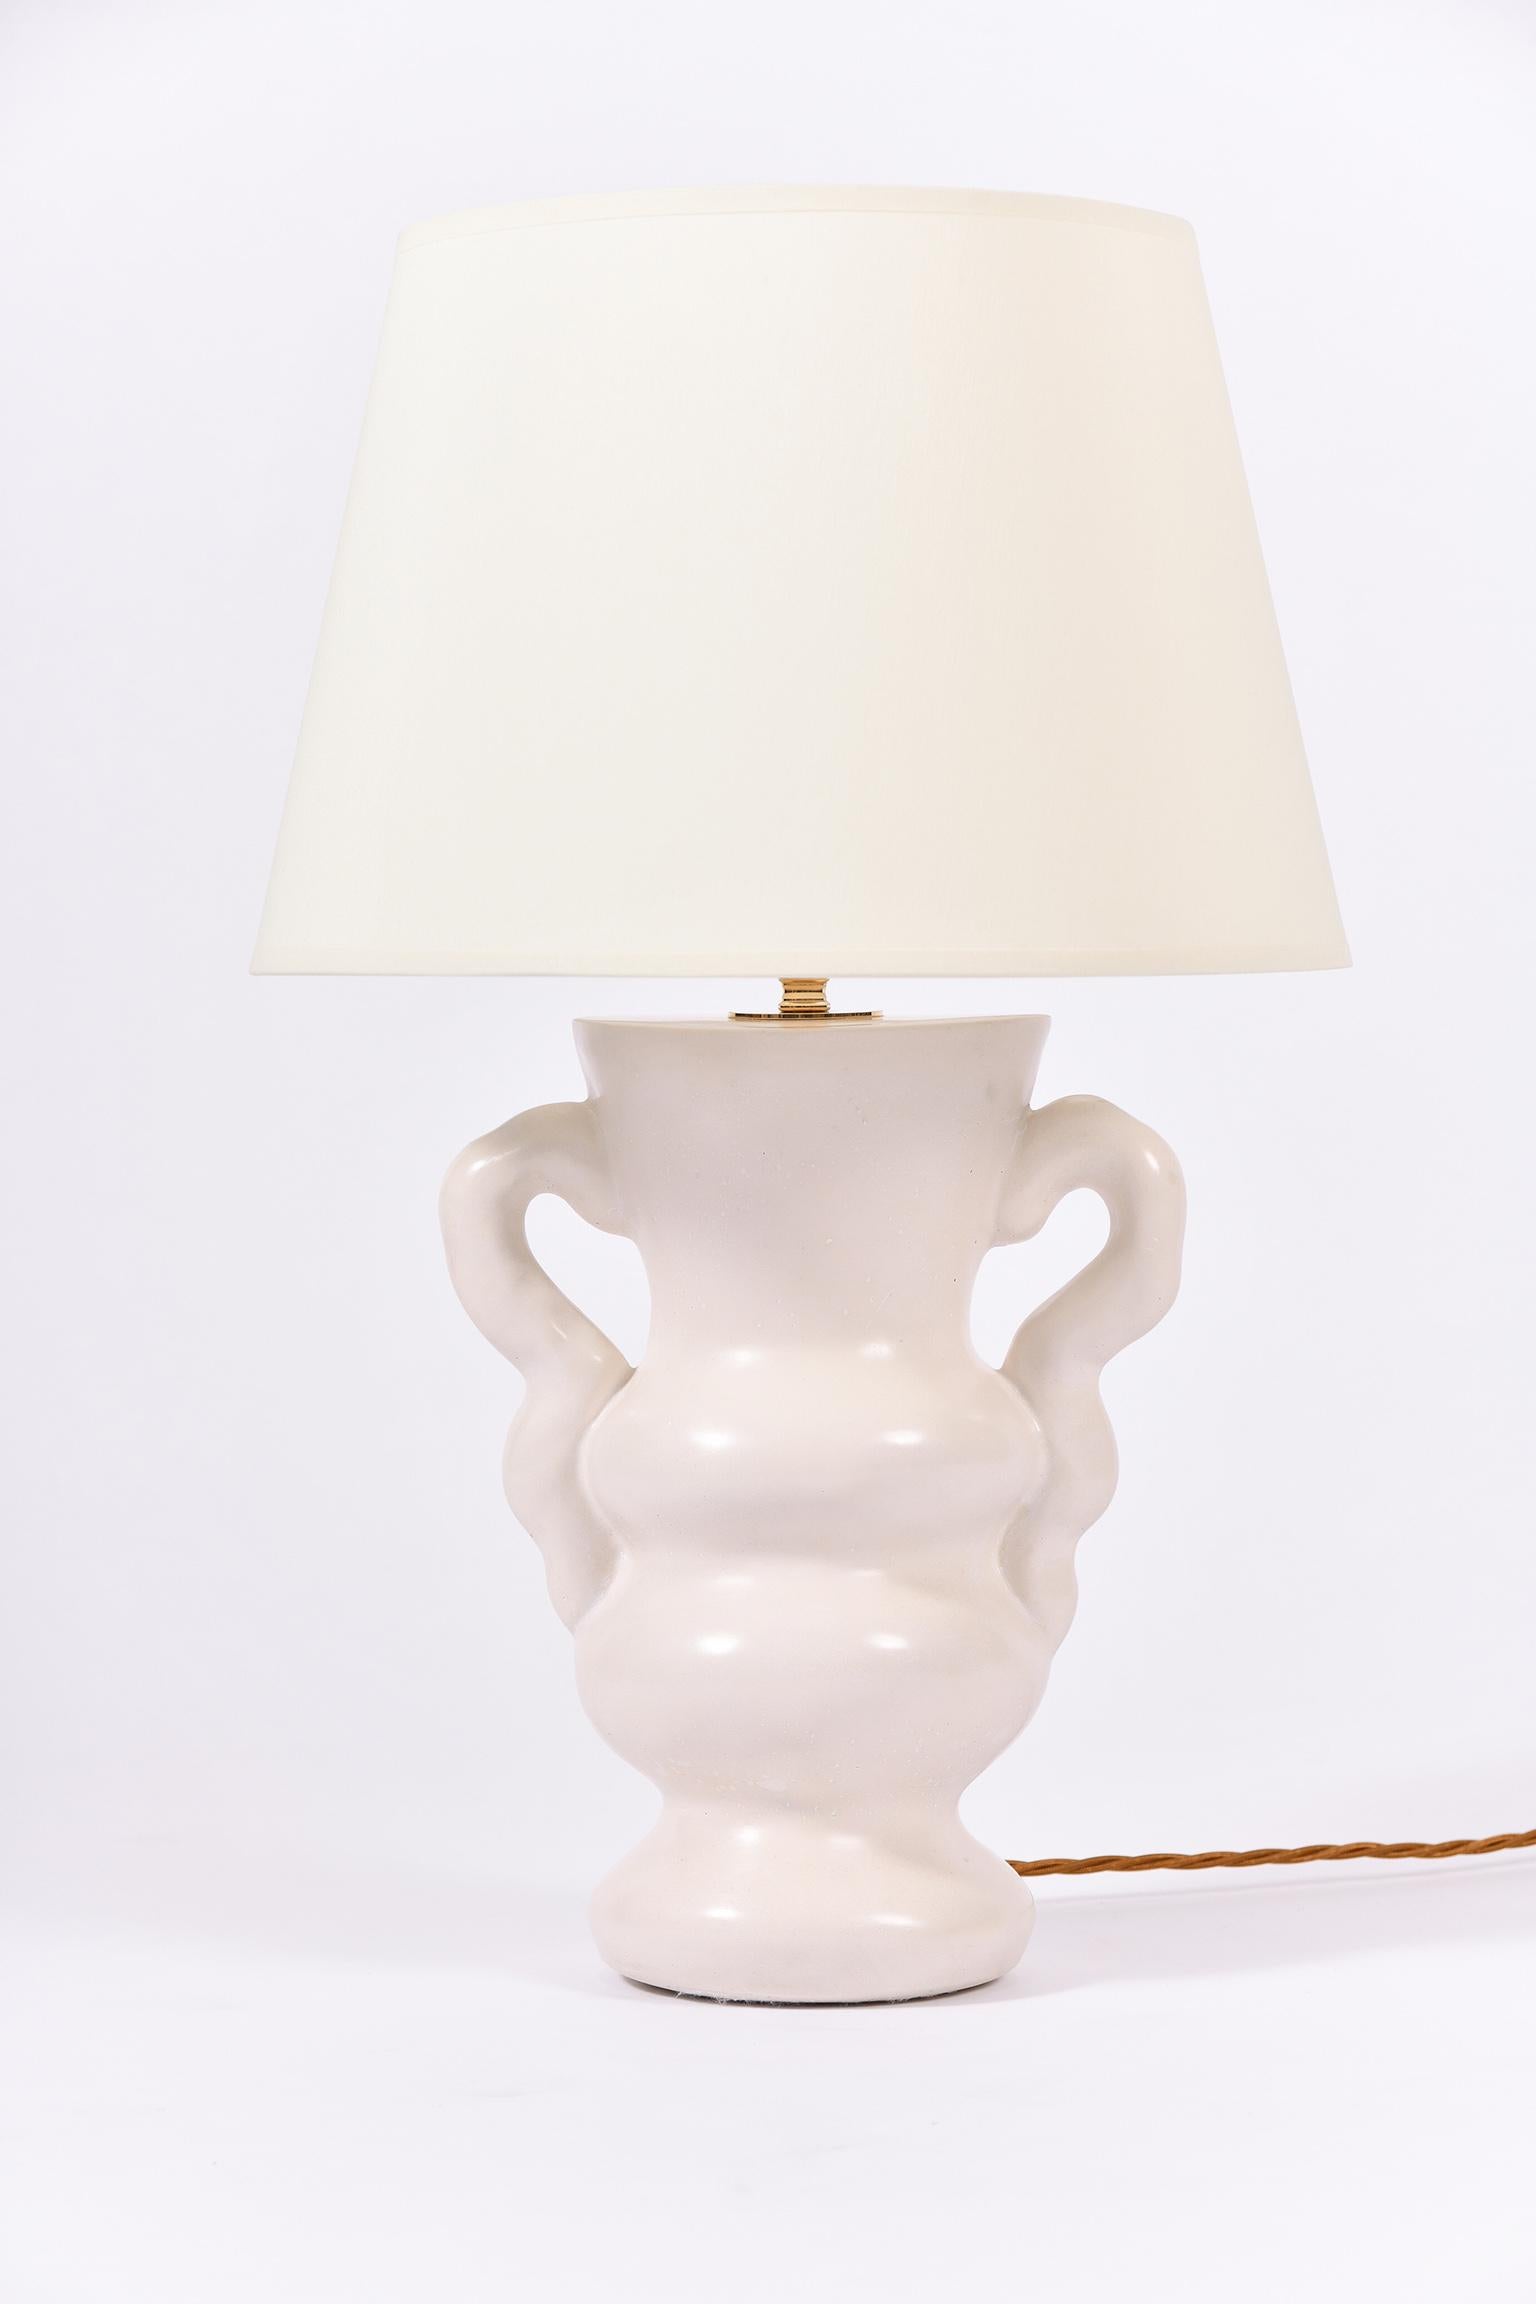 A pair of Ysolde table lamps, by Dorian Caffot de Fawes
Hand cast in London, polished and waxed high quality plaster
with a bespoke ivory fabric tapered shade.
 